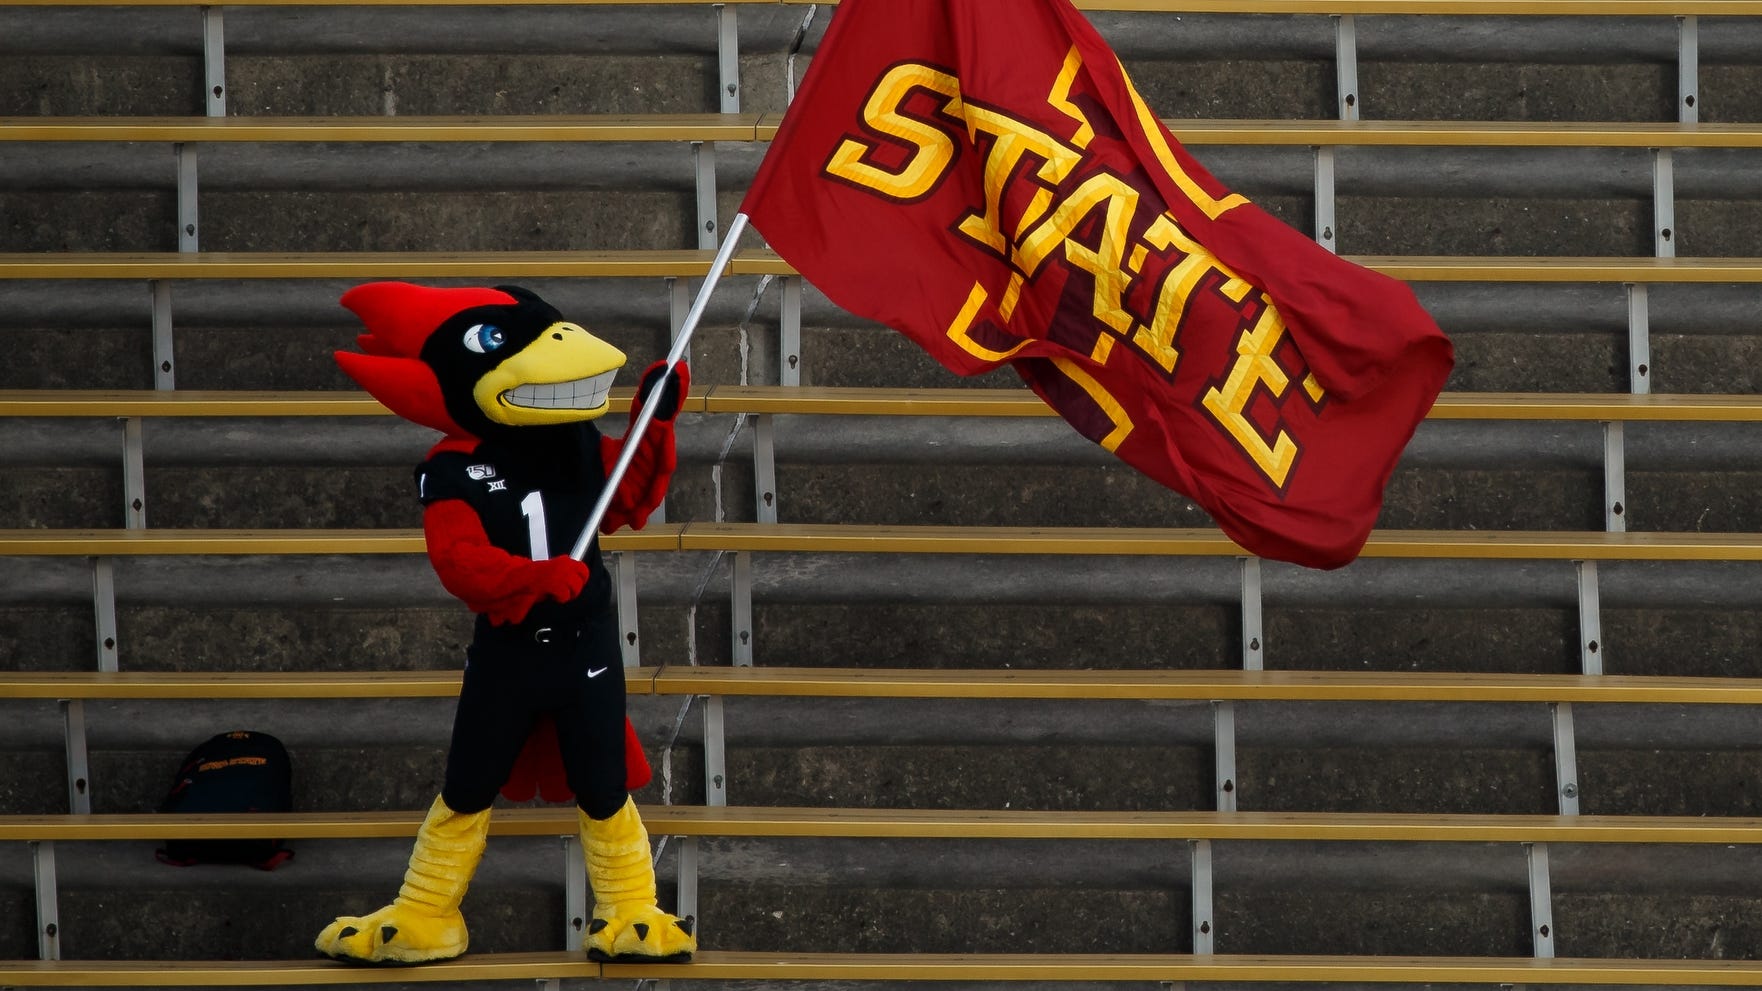 Iowa State football clinches Big 12 Conference championship game berth